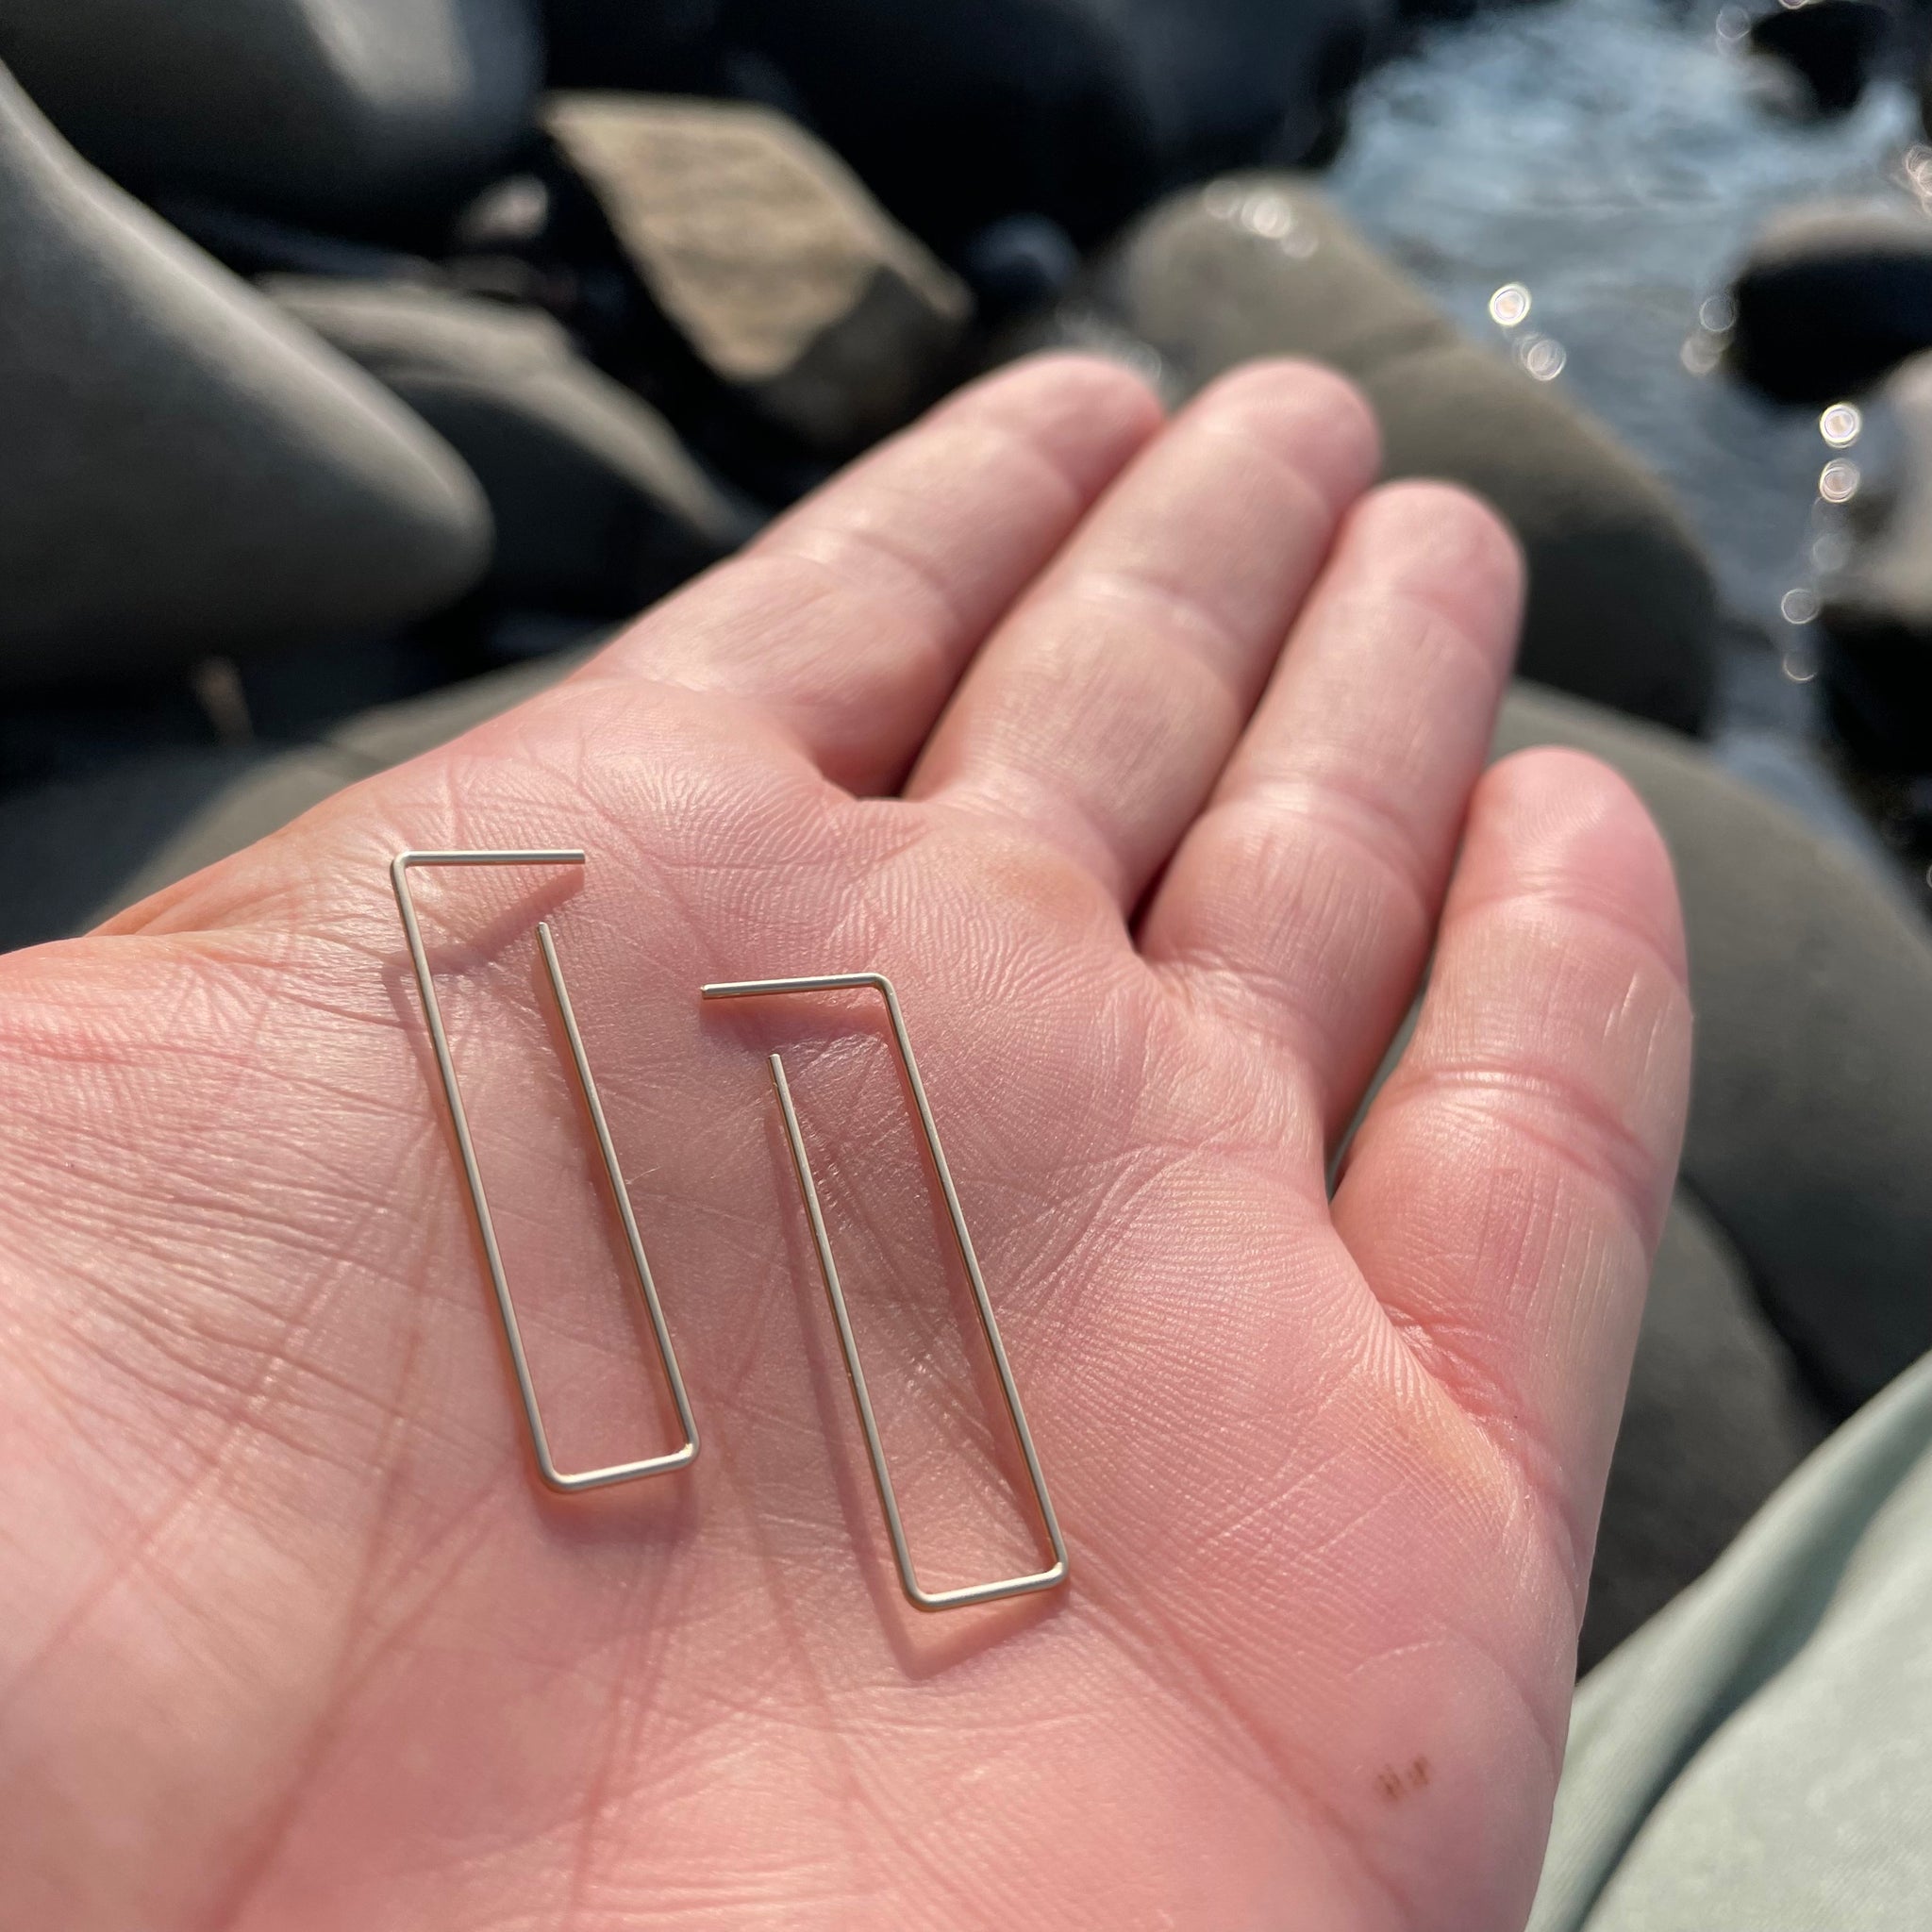 Tiny Rectangle 14k Gold fill Earrings by 8.6.4 Design